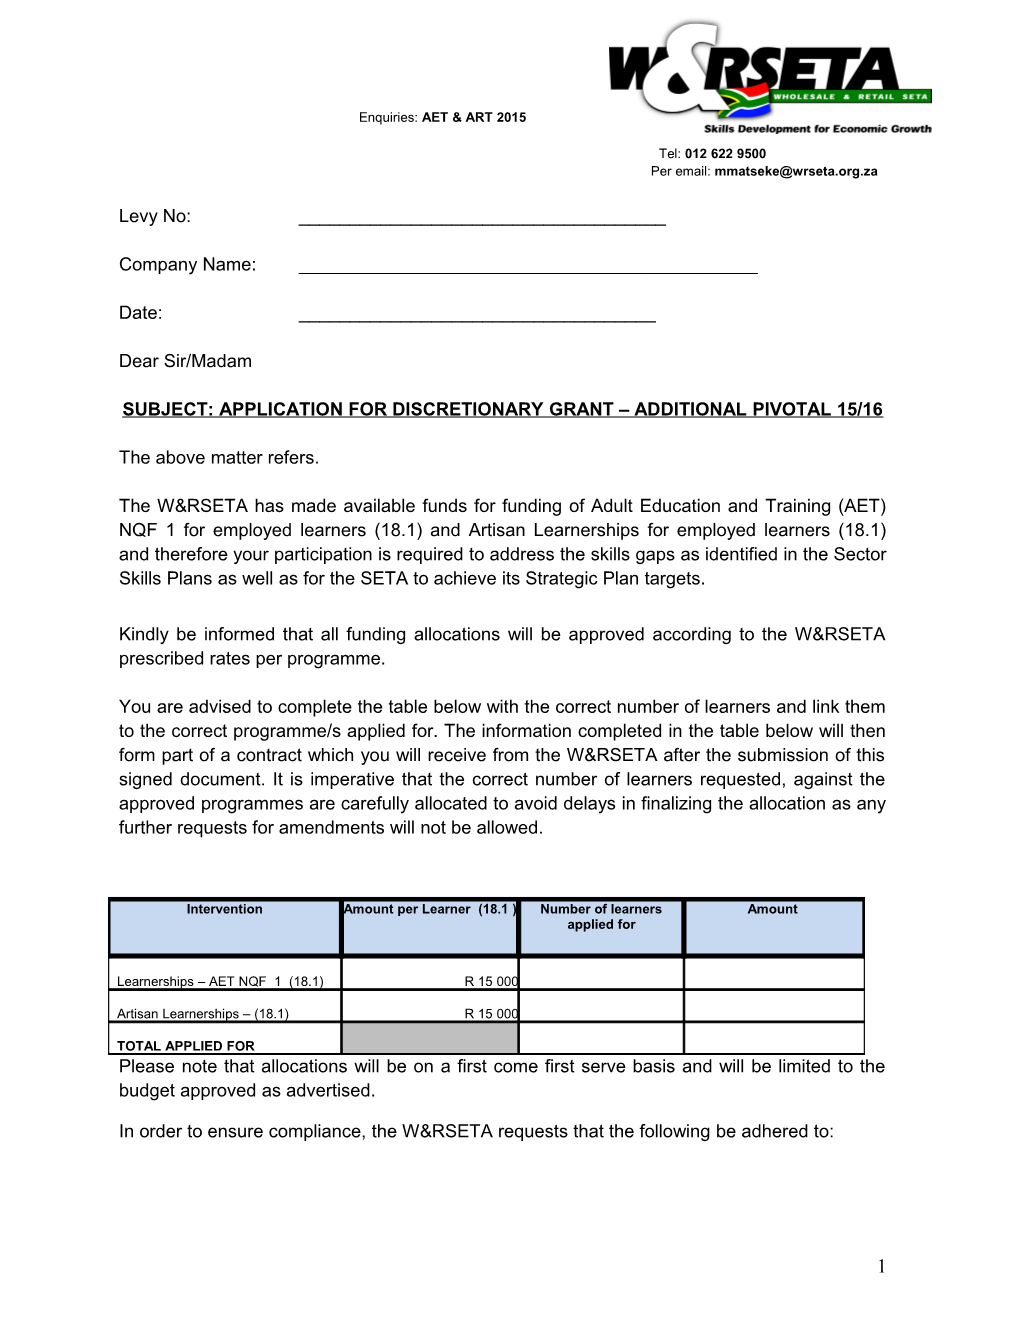 Subject: Application for Discretionary Grant Additional Pivotal 15/16